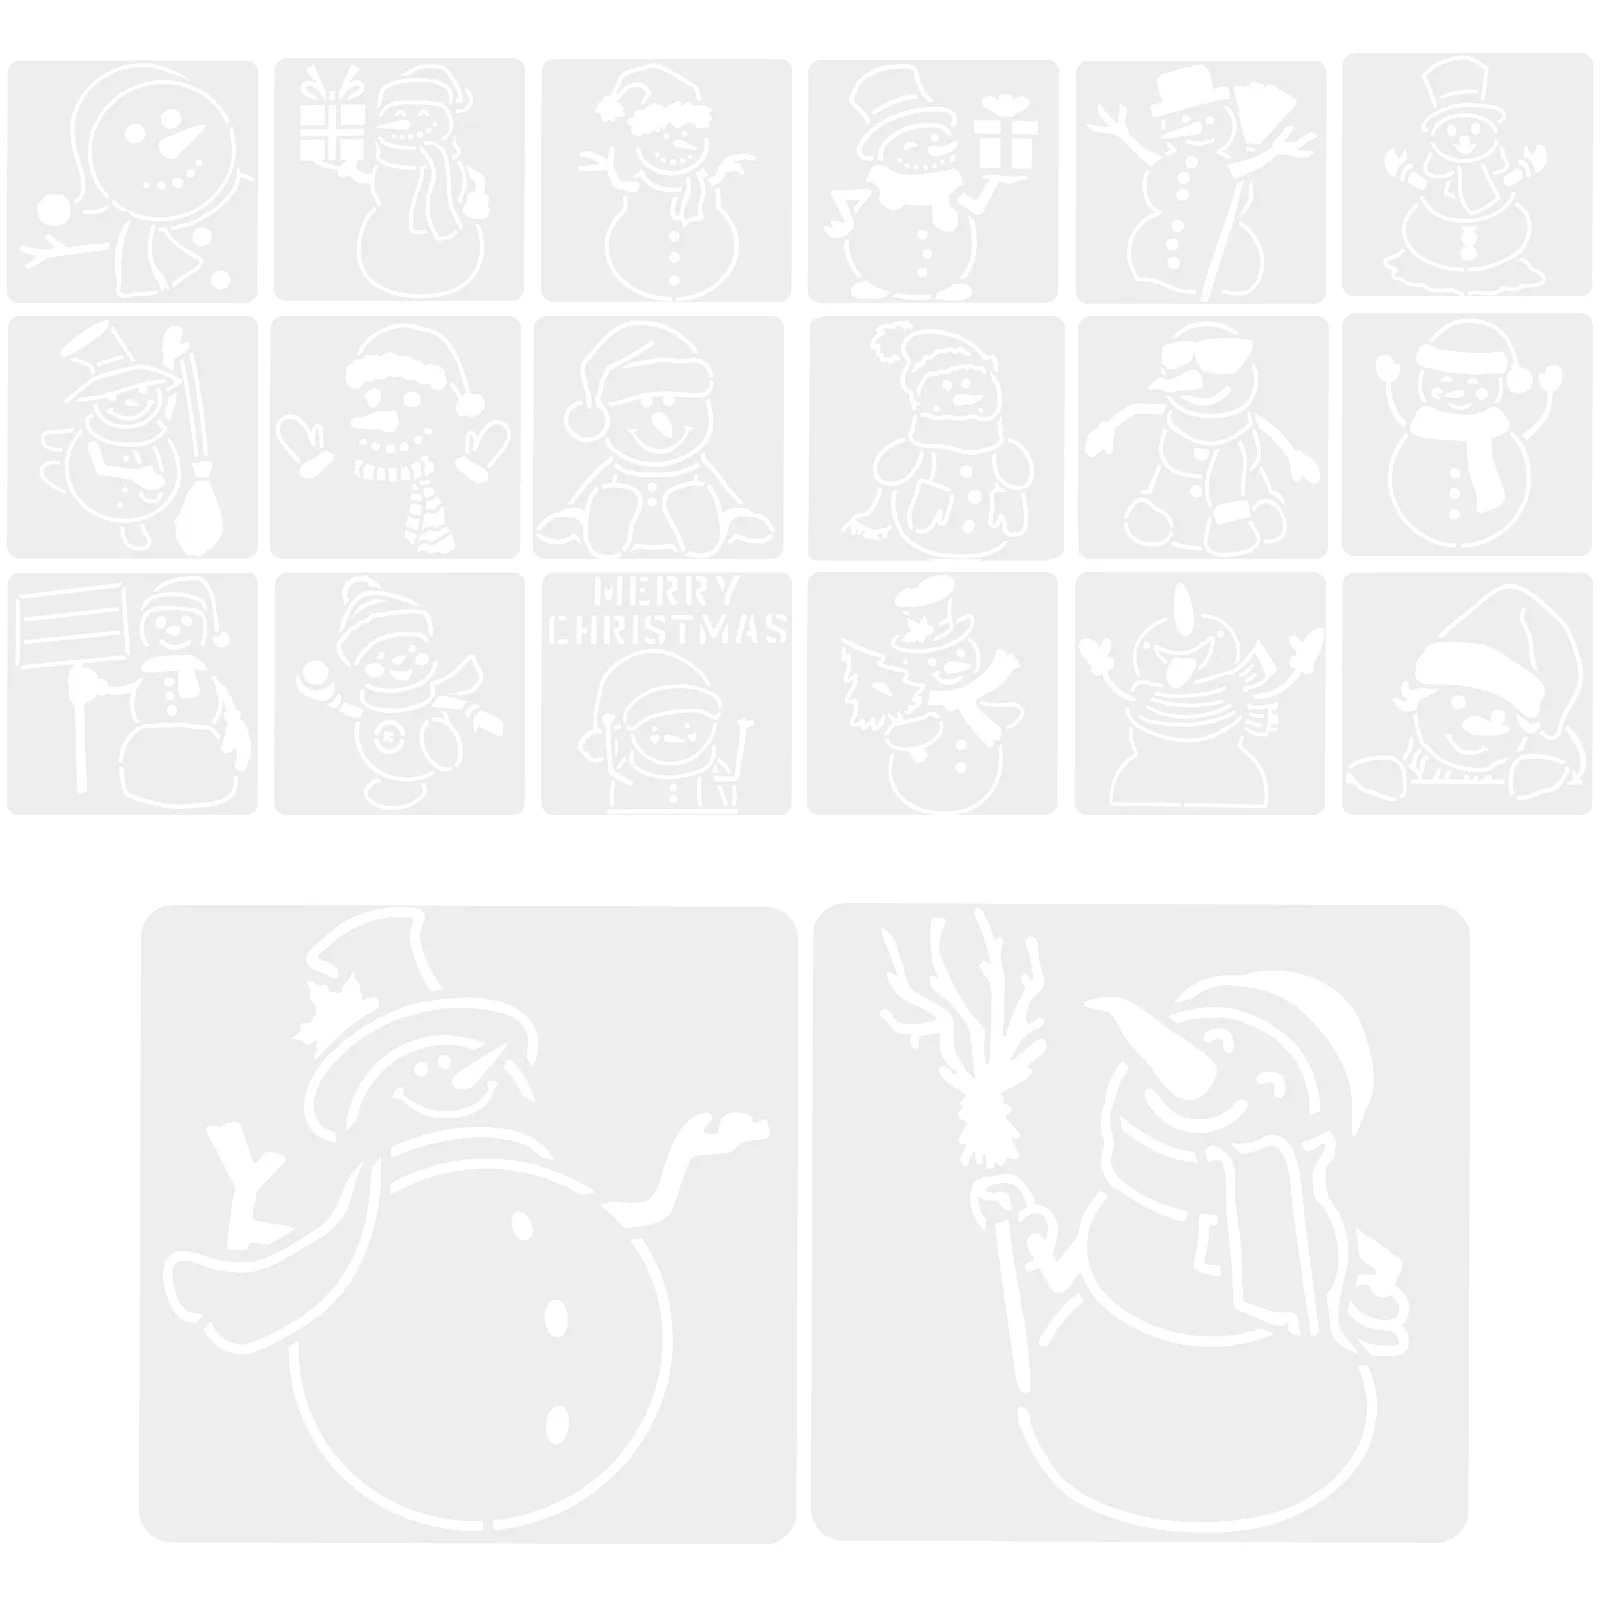 20 Pcs Home Spray Stencils Craft Accessories Crafts Template Xmas Printing The Pet Snowman DIY Supplies Child Metal Decor silicone clay molds small bottles silicone craft moulds resin crafts supplies diy hand making accessories for diy